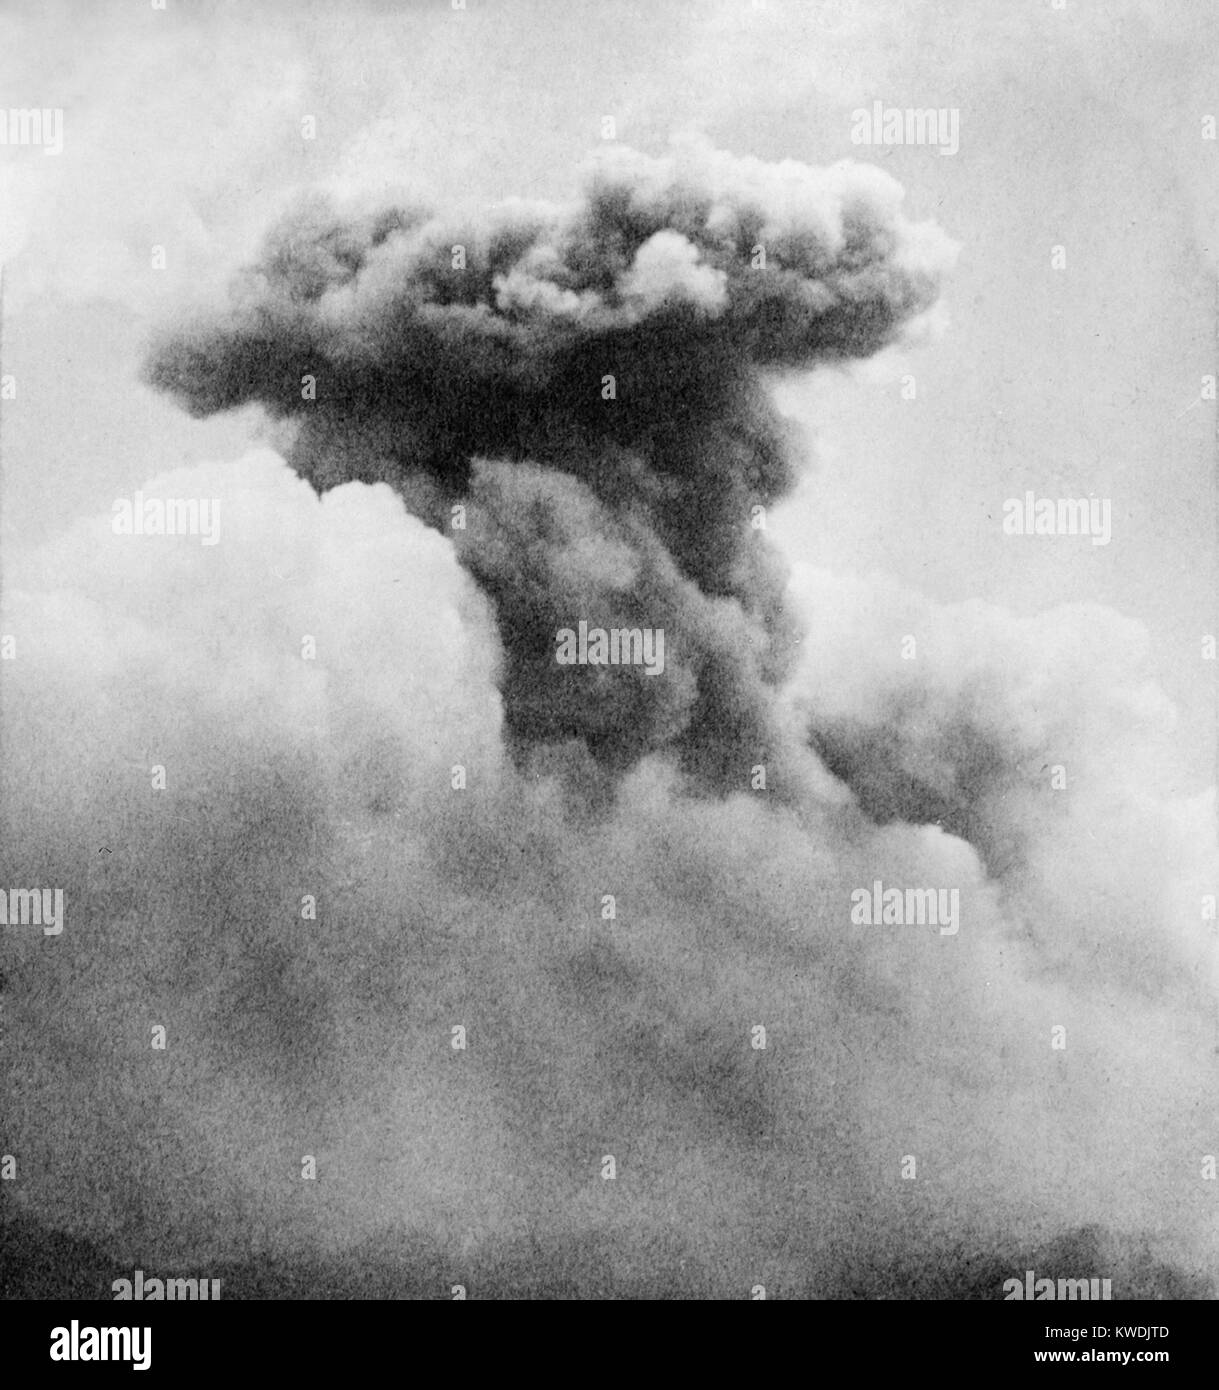 Mushroom smoke column of Mont Pelee, Martinique, a French territory in Caribbean in June 1902. The volcano began erupting on April 23, 1902, and continued with increasing force until before the fatal pyroclastic flow of June 8, 1902 (BSLOC 2017 17 61) Stock Photo